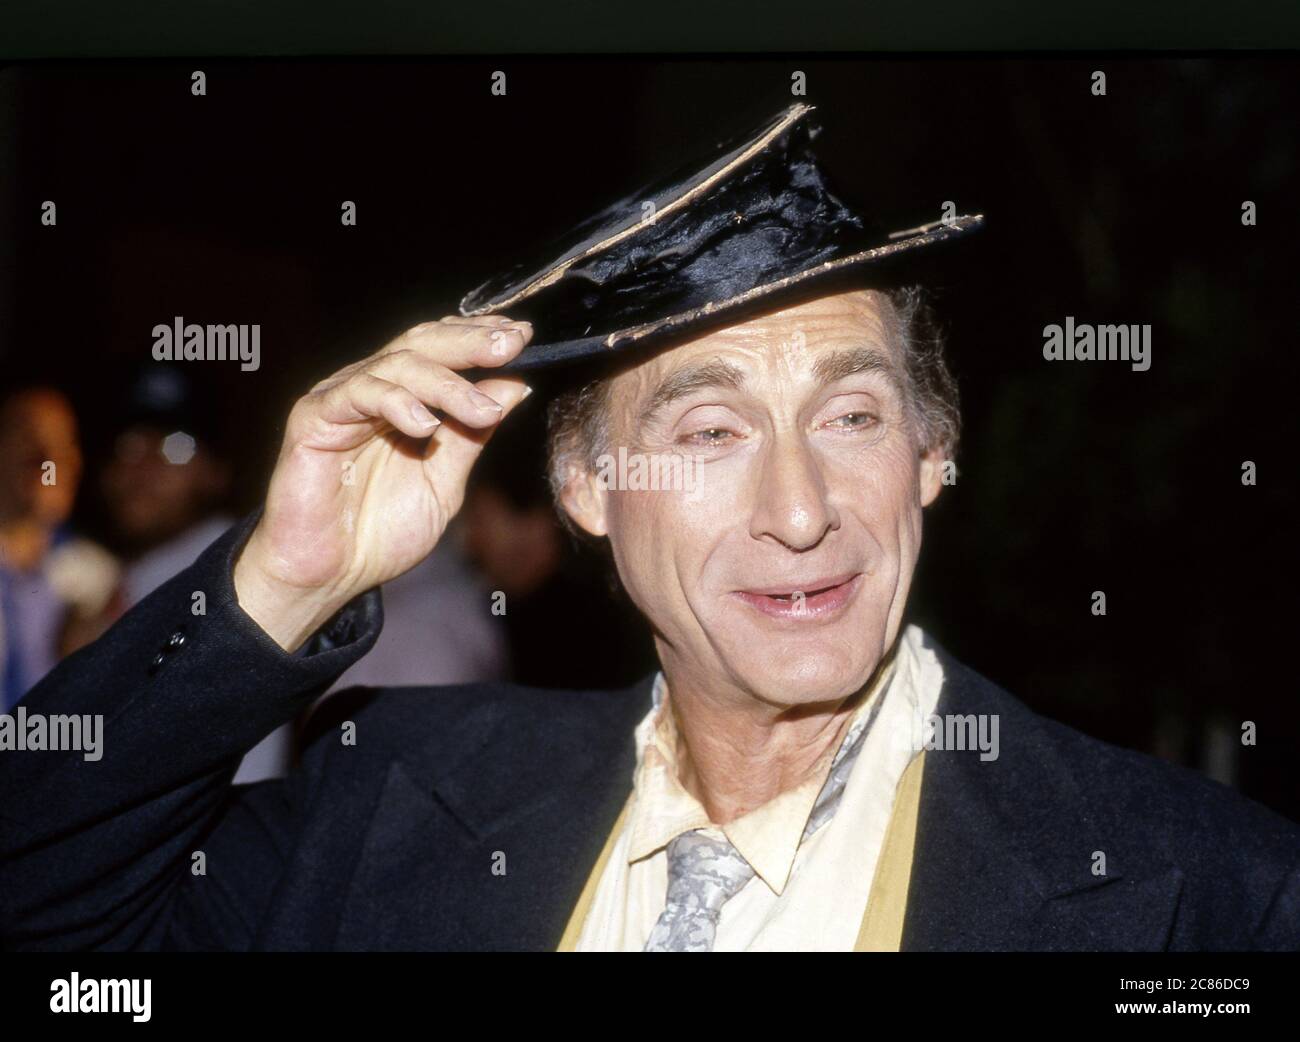 Sid Caesar performing a comedy sketch Stock Photo